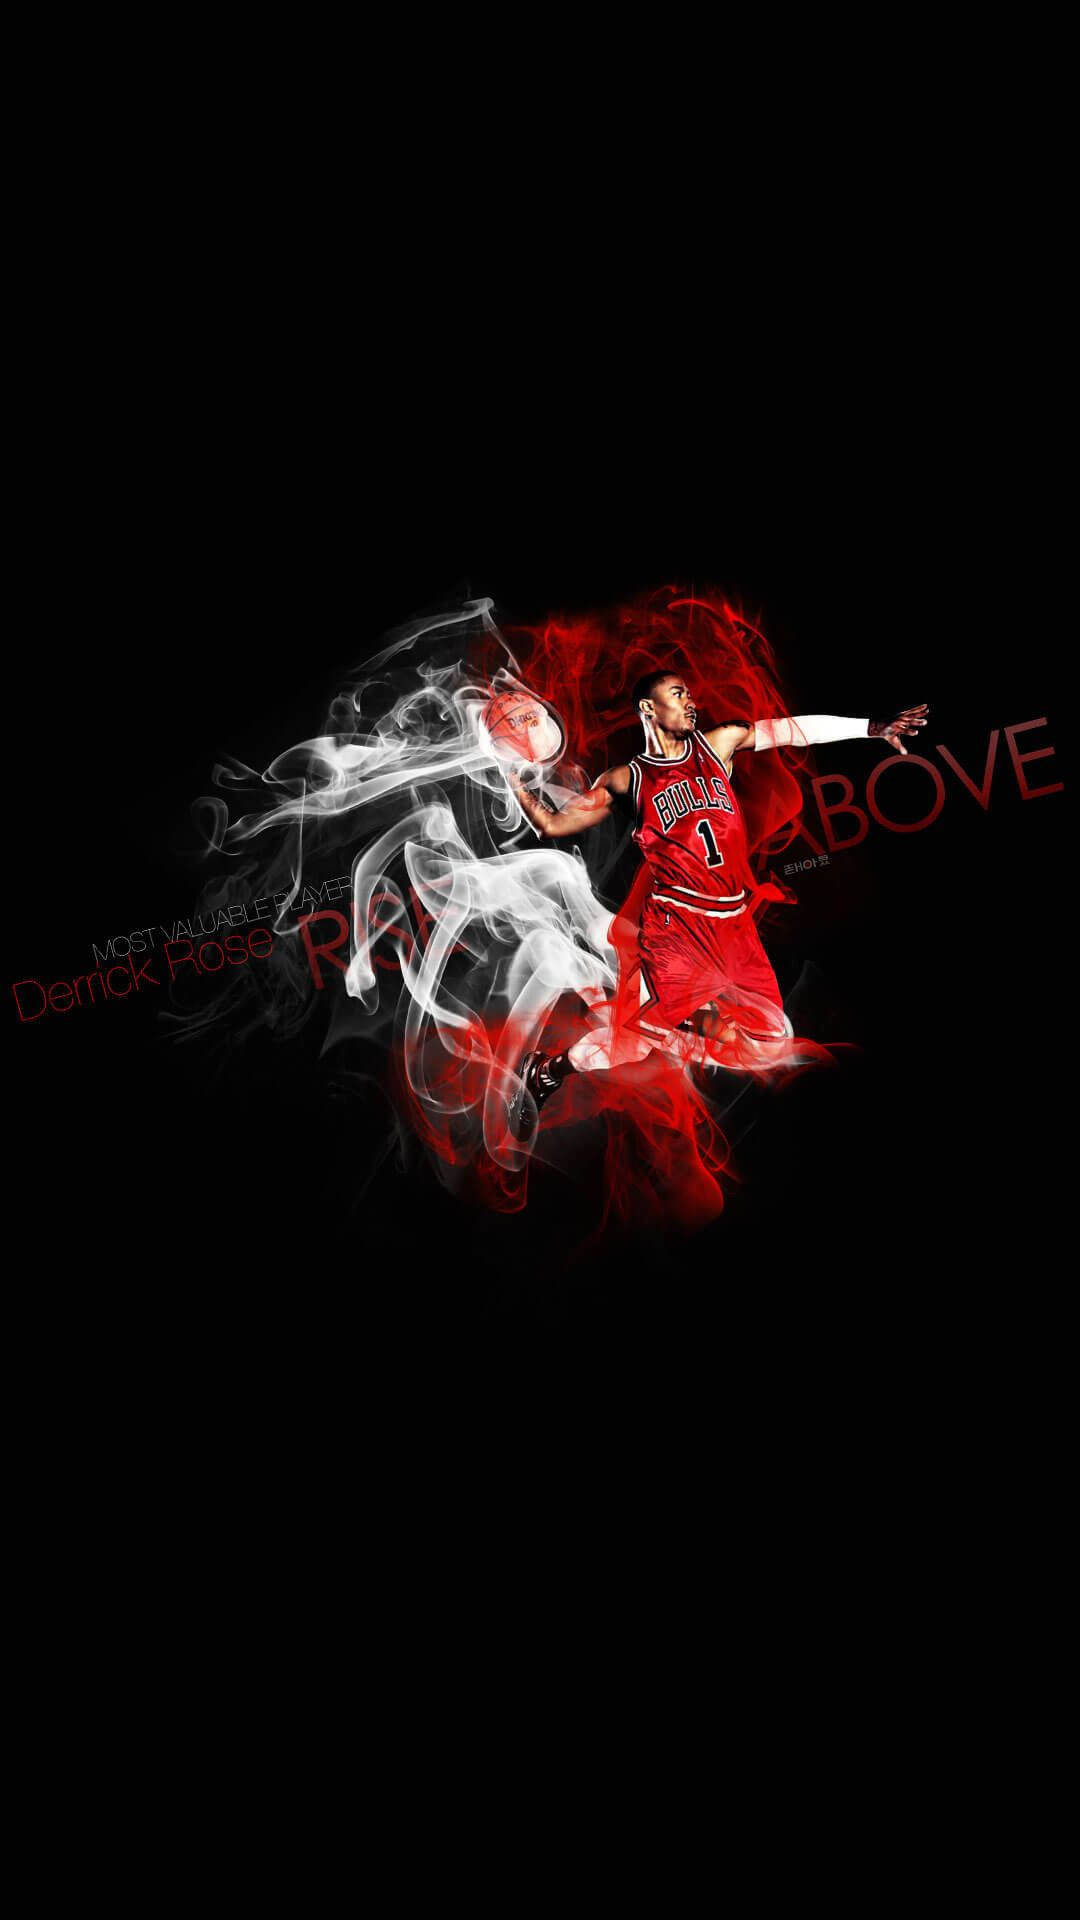 Benny The Bull Wallpapers - Wallpaper Cave